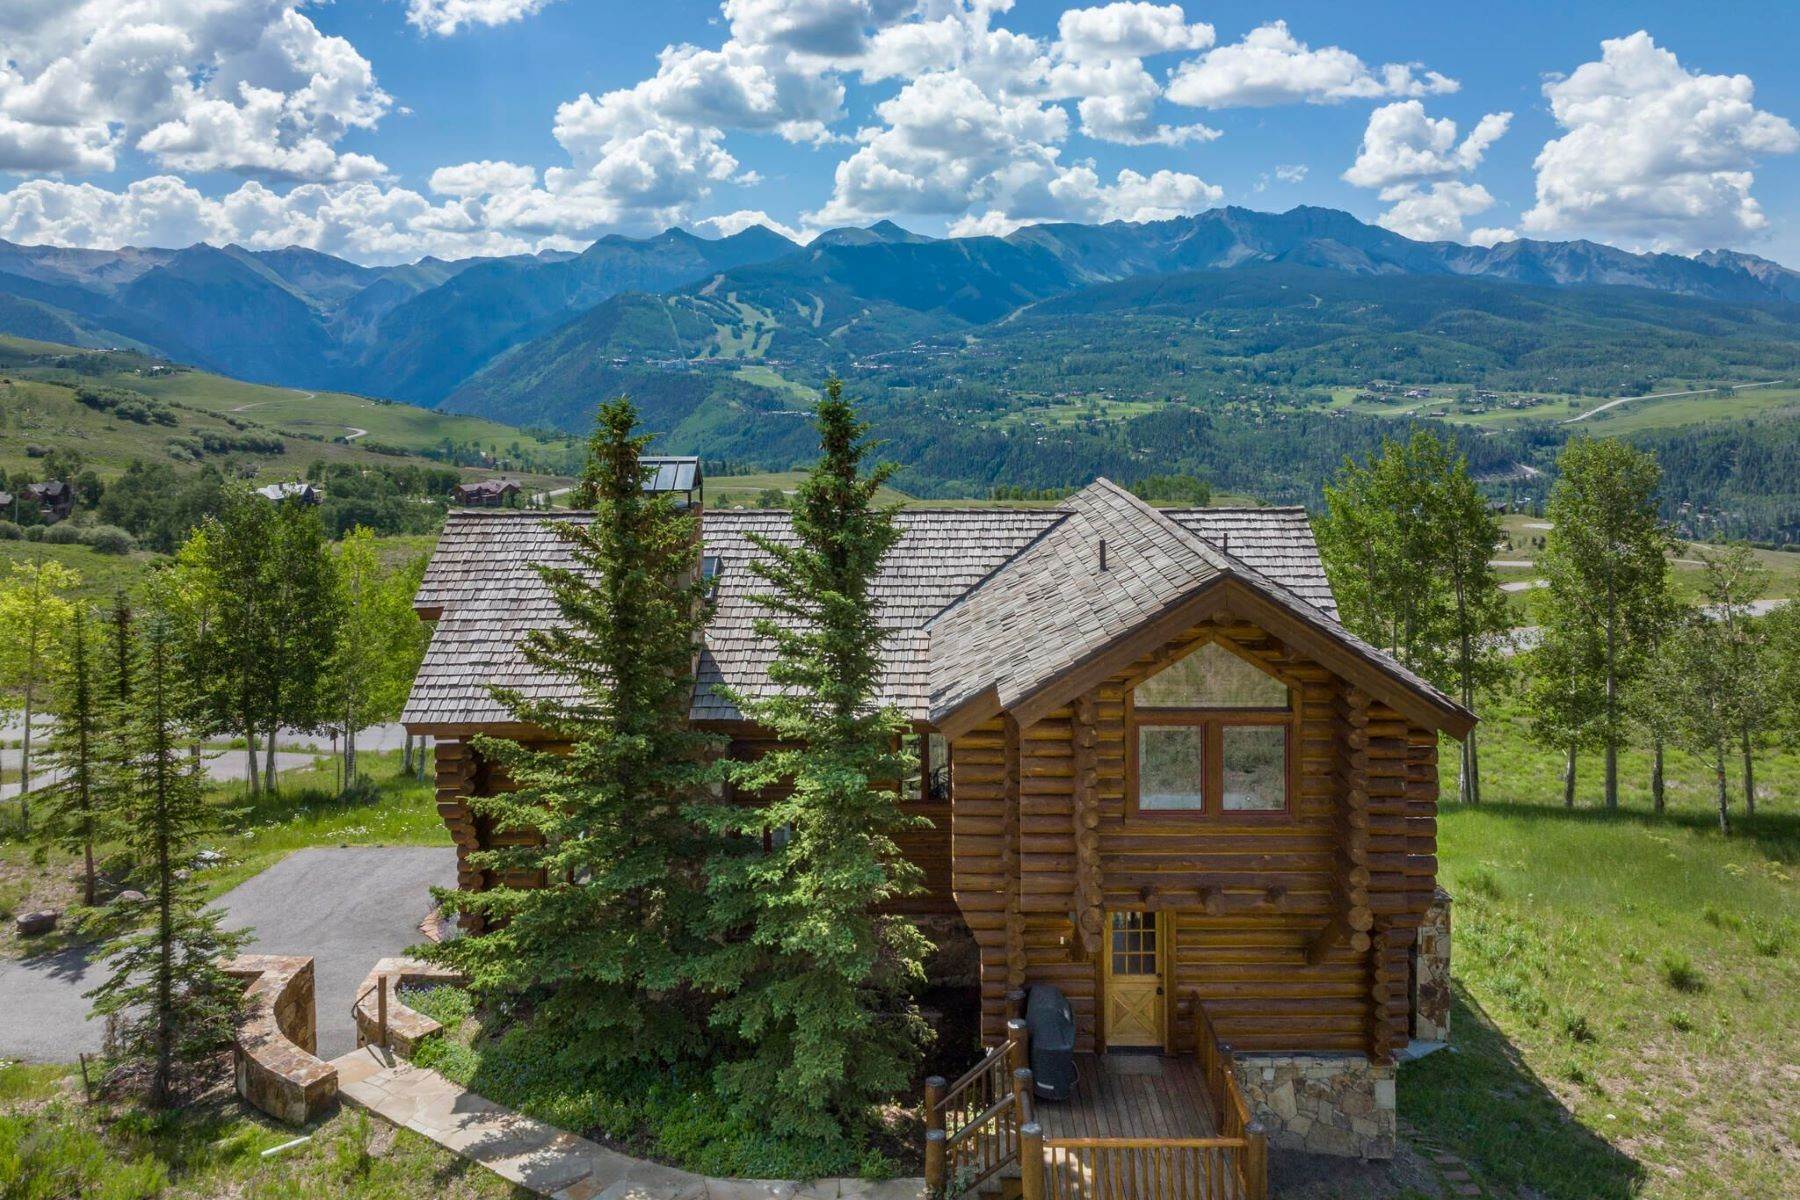 Property for Active at 213 Basque Boulevard, Telluride, CO, 81435 213 Basque Boulevard Telluride, Colorado 81435 United States